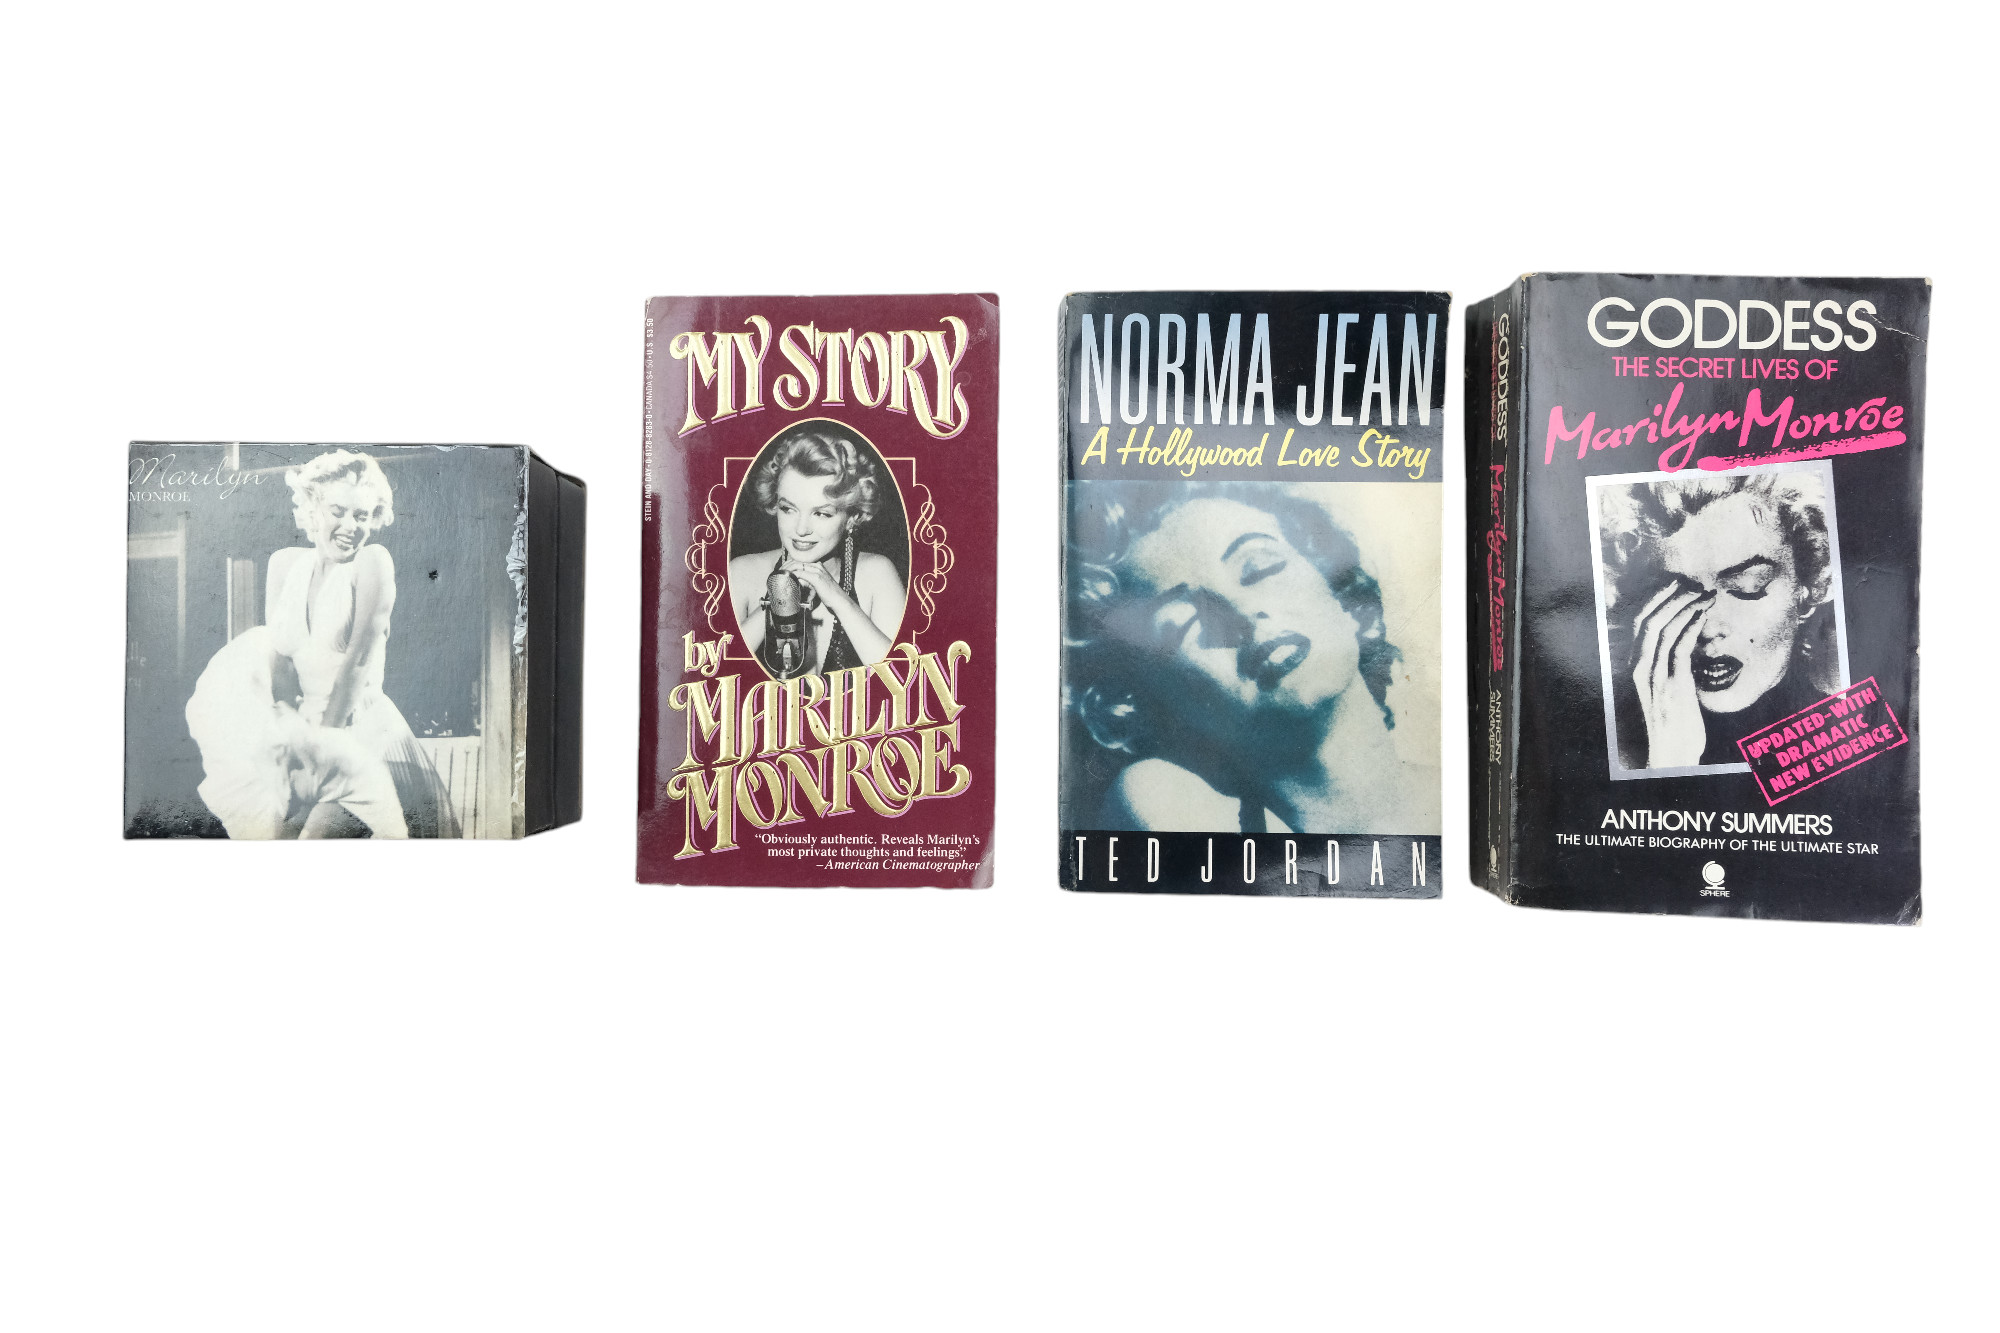 A collection of Marilyn Monroe memorabilia including bags, books, etc - Image 2 of 9